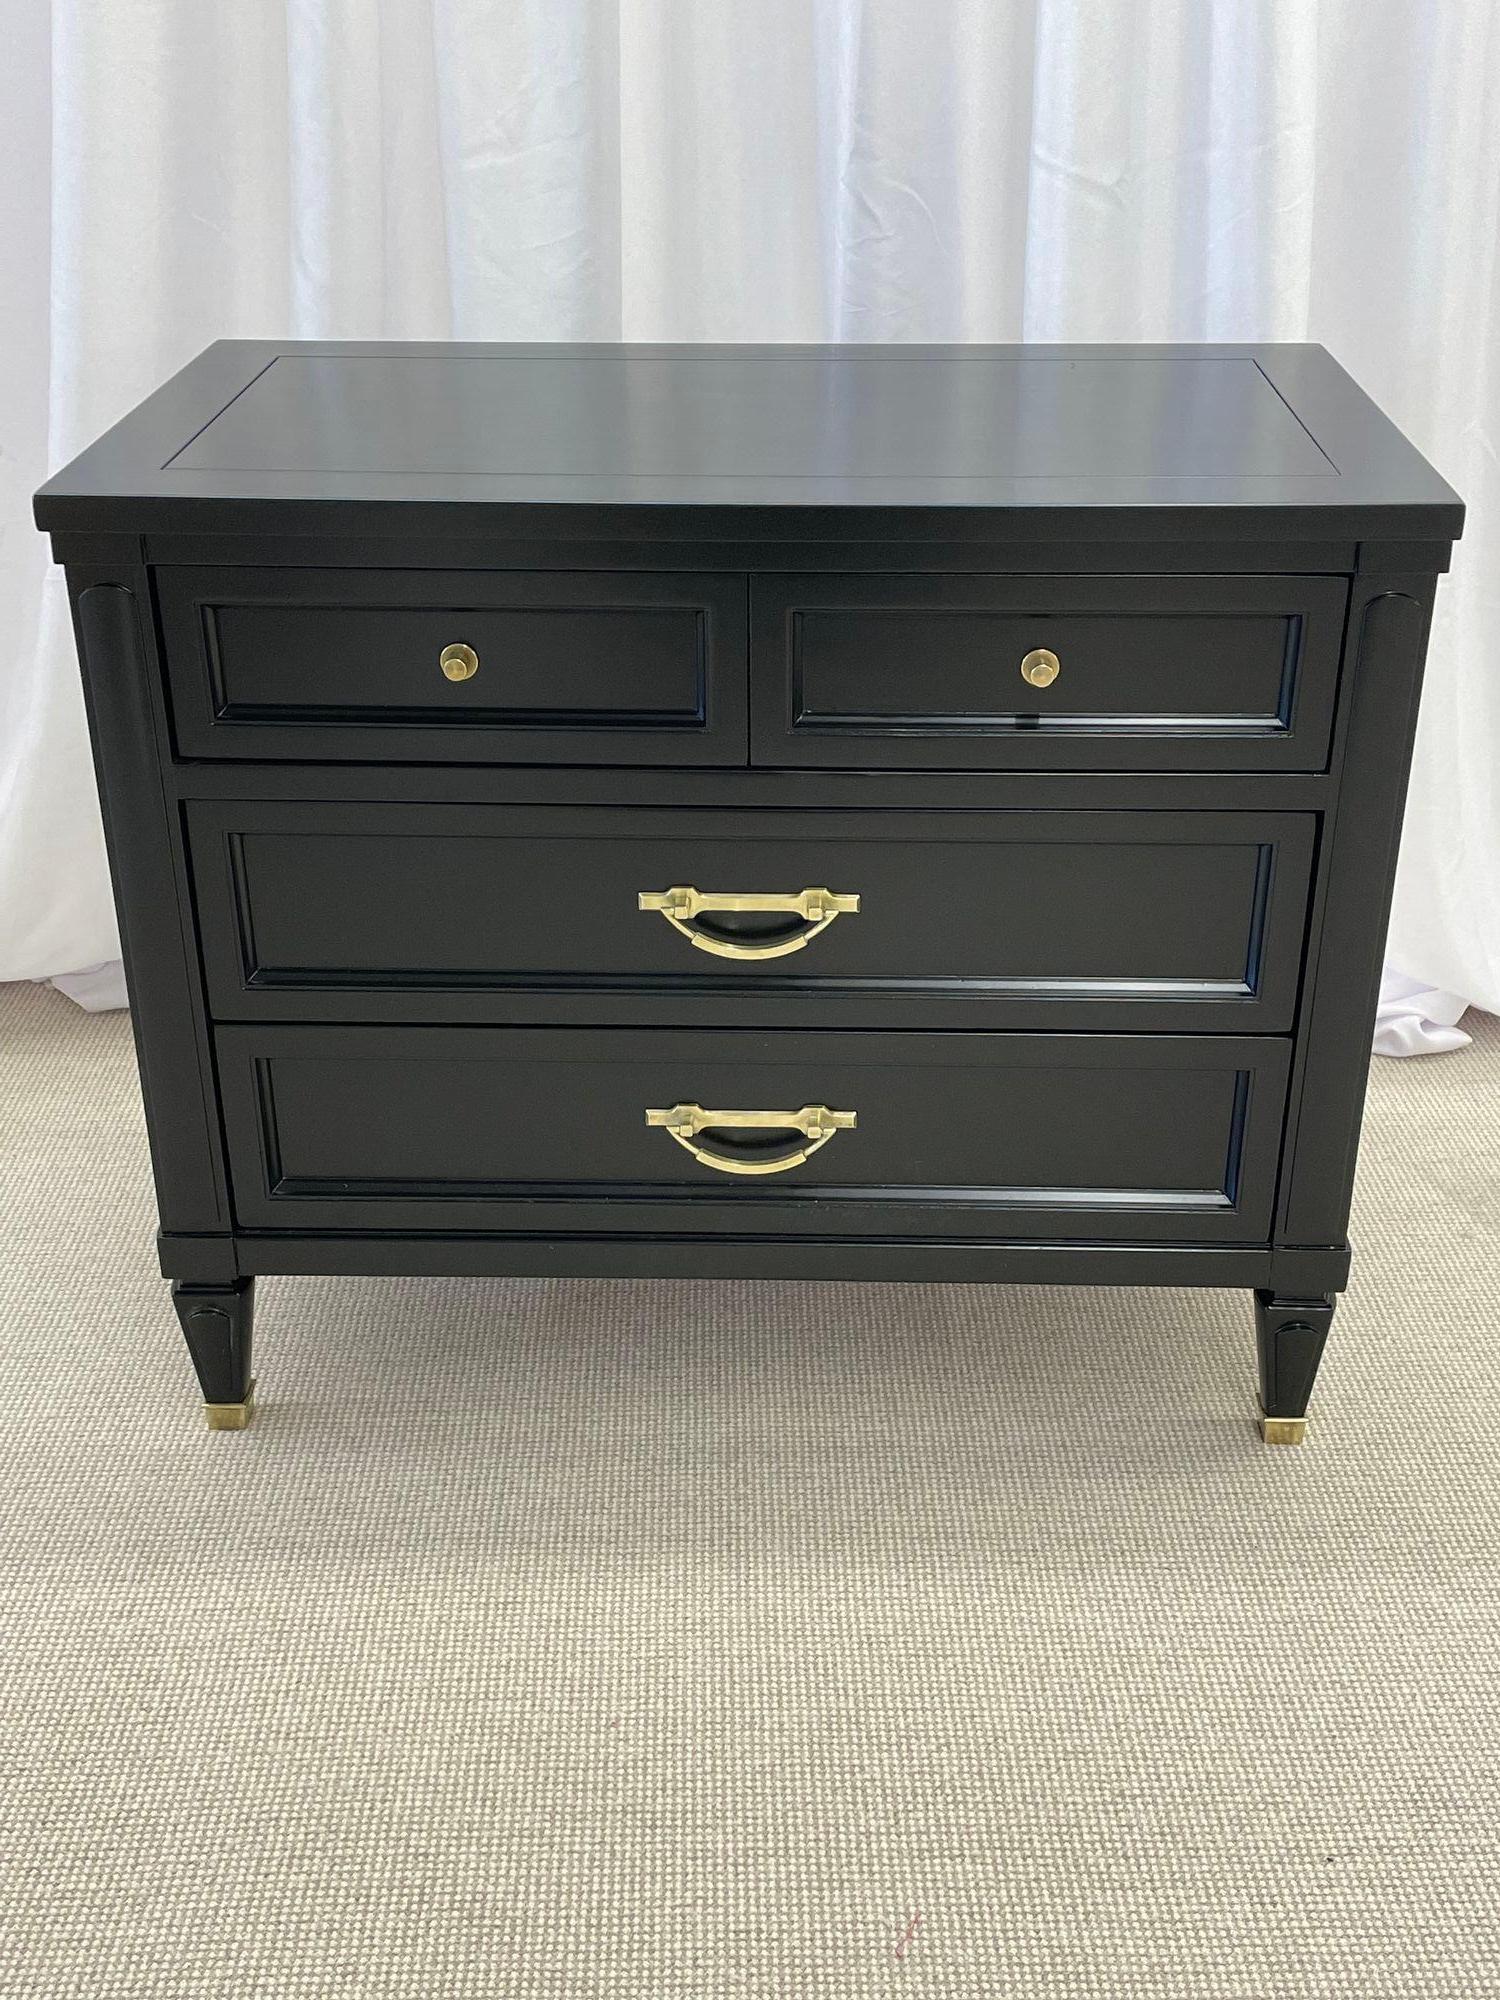 Hollywood Regency nightstand, bedside table or end table, ebony, bronze mounts
Fully refinished chest or commode in a Recent Ebony Finish with bronze mounts and pulls. Having three drawers with recessed column sides. A simply stunning chest or